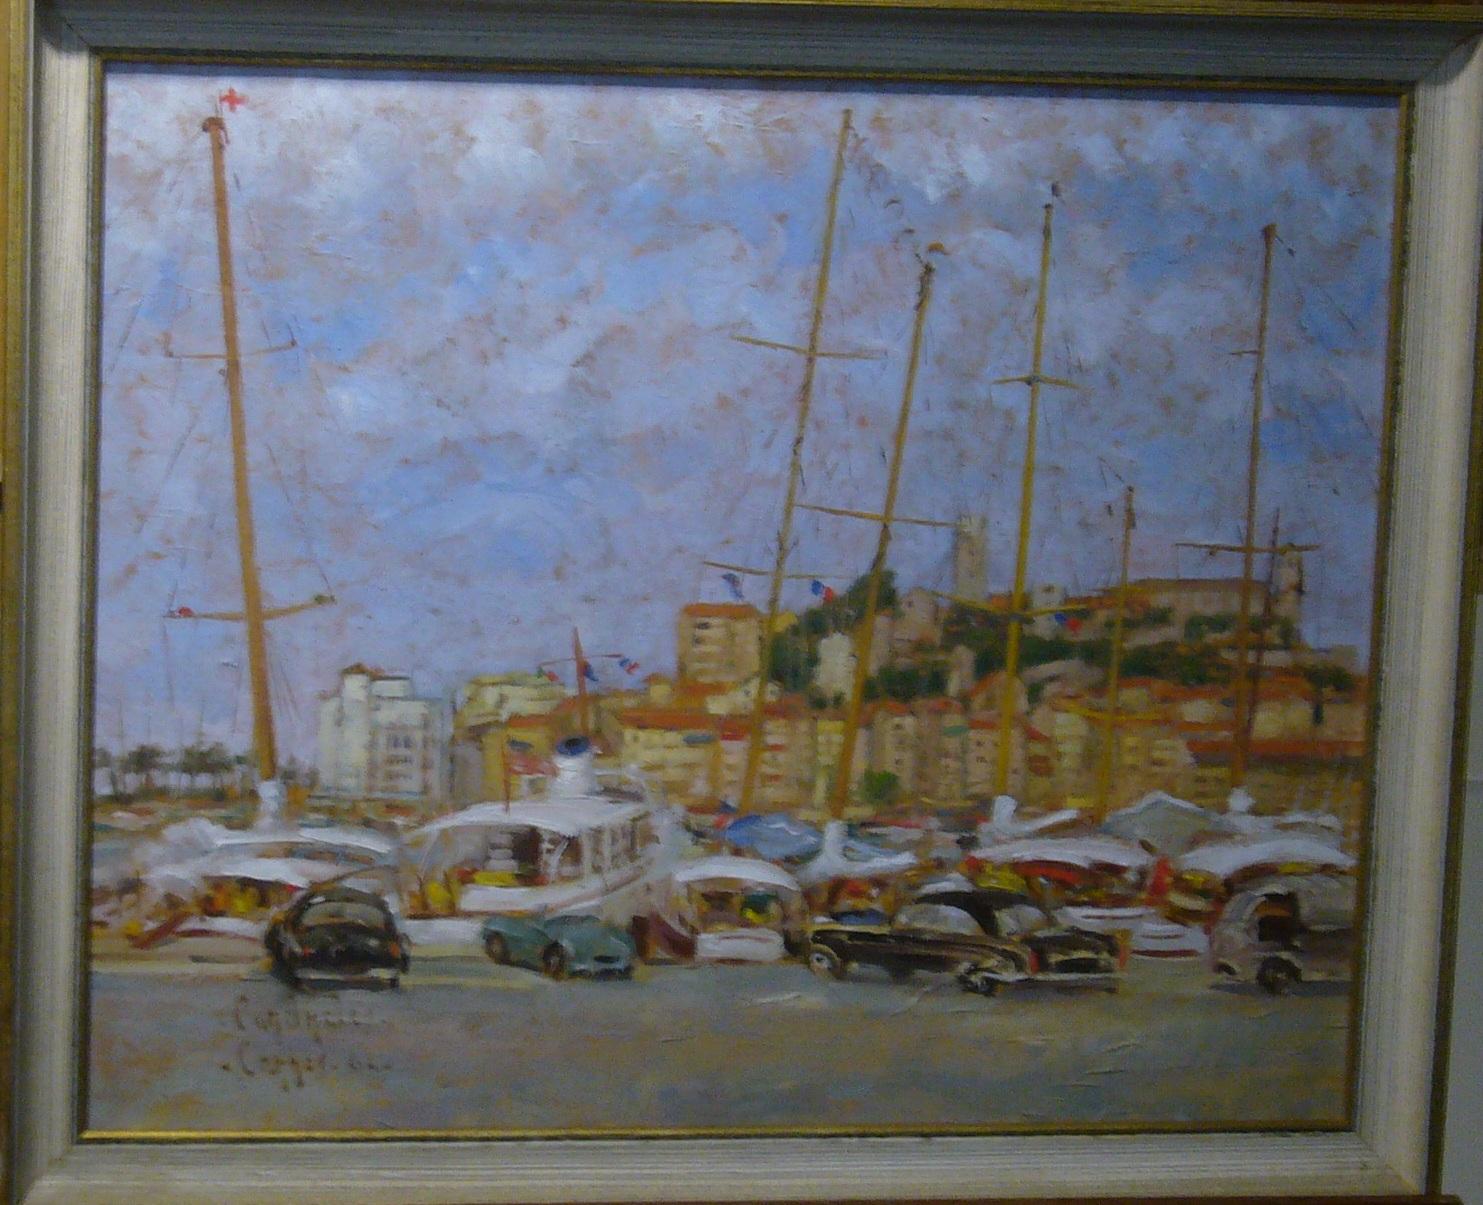 Cannes (South of France) - oil on canvas, 50x61 cm. - Painting by Candhales